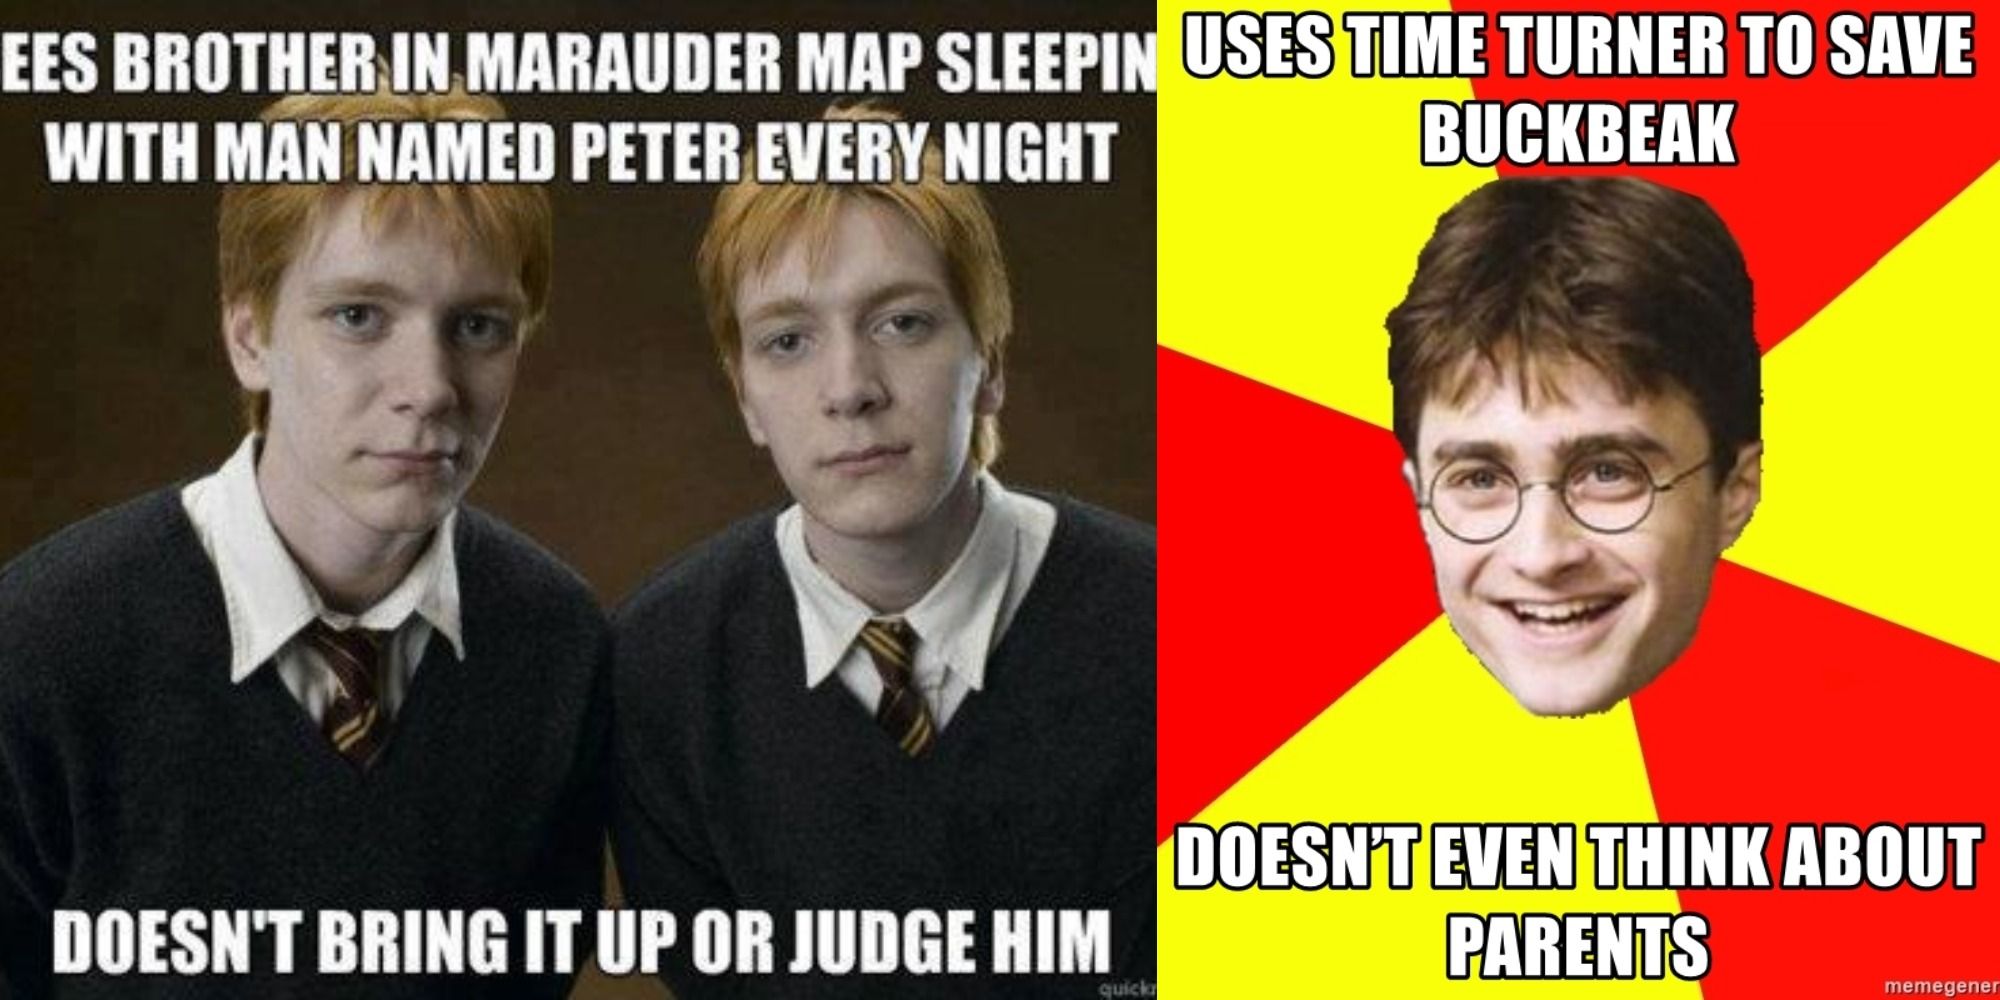 Harry Potter Funny Memes and Jokes: Expelliarmus! Leave Everything